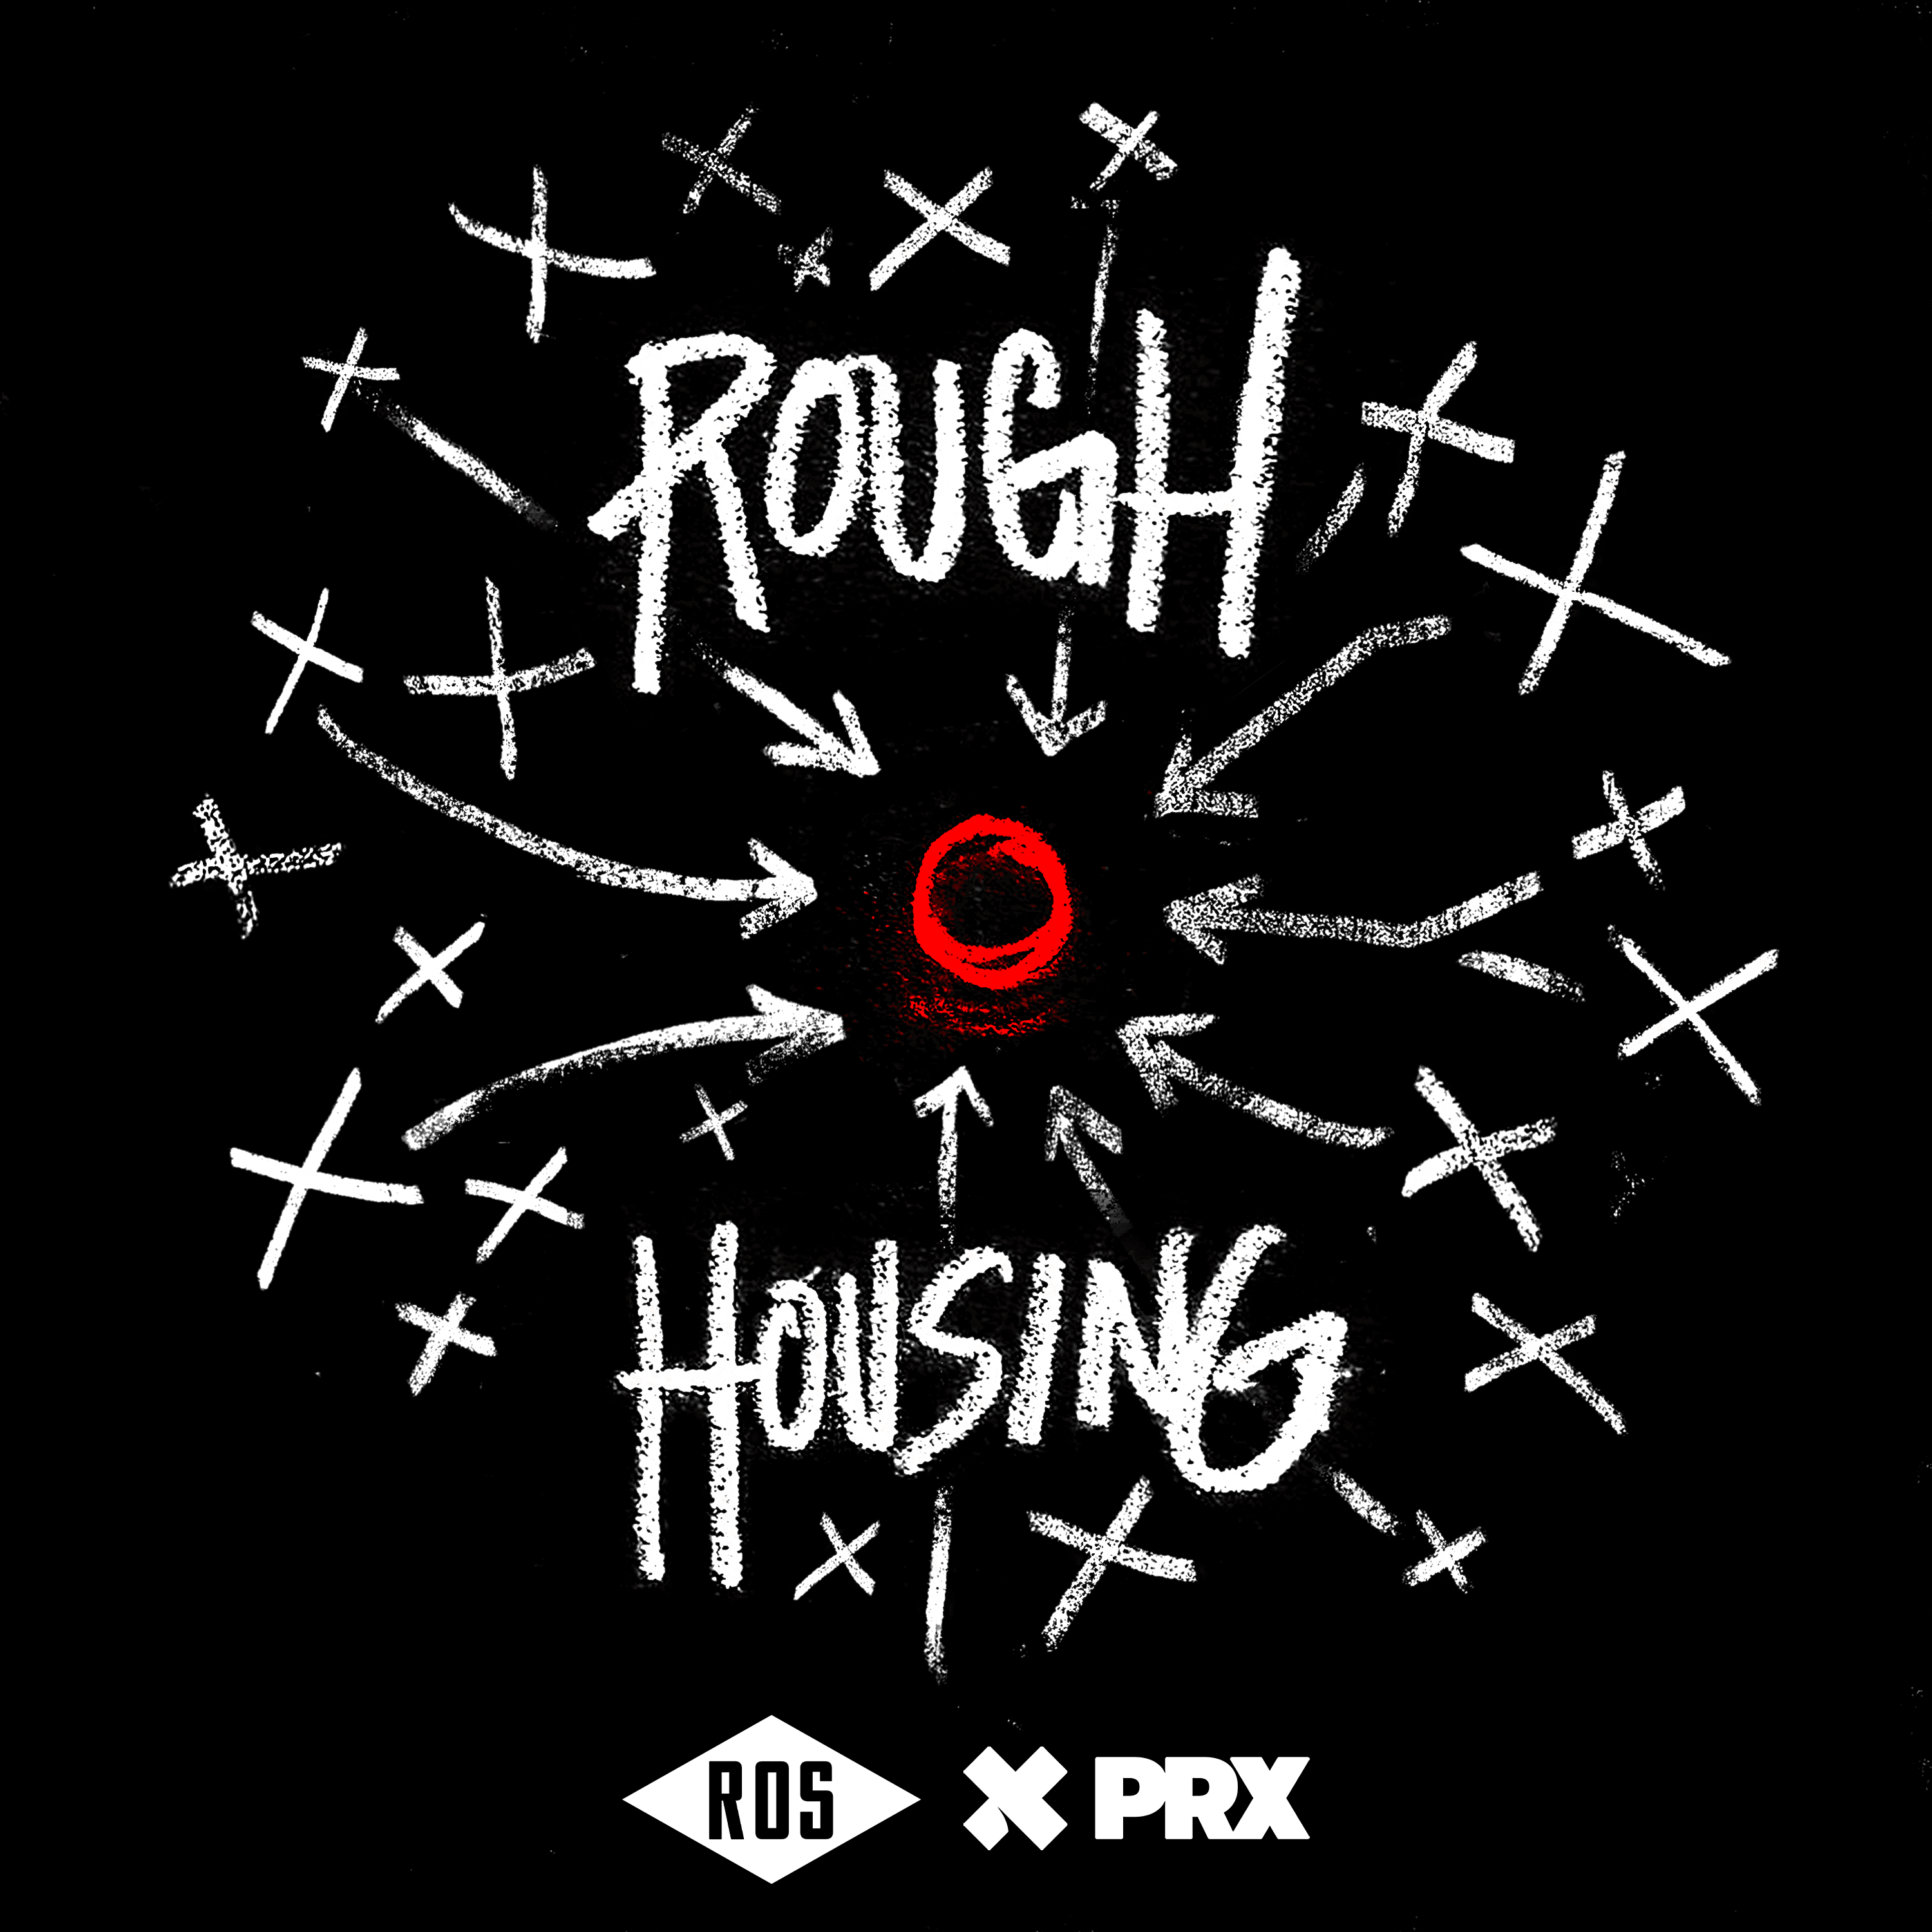 Thumbnail for "Introducing: Roughhousing, Part 1: Hell Week".